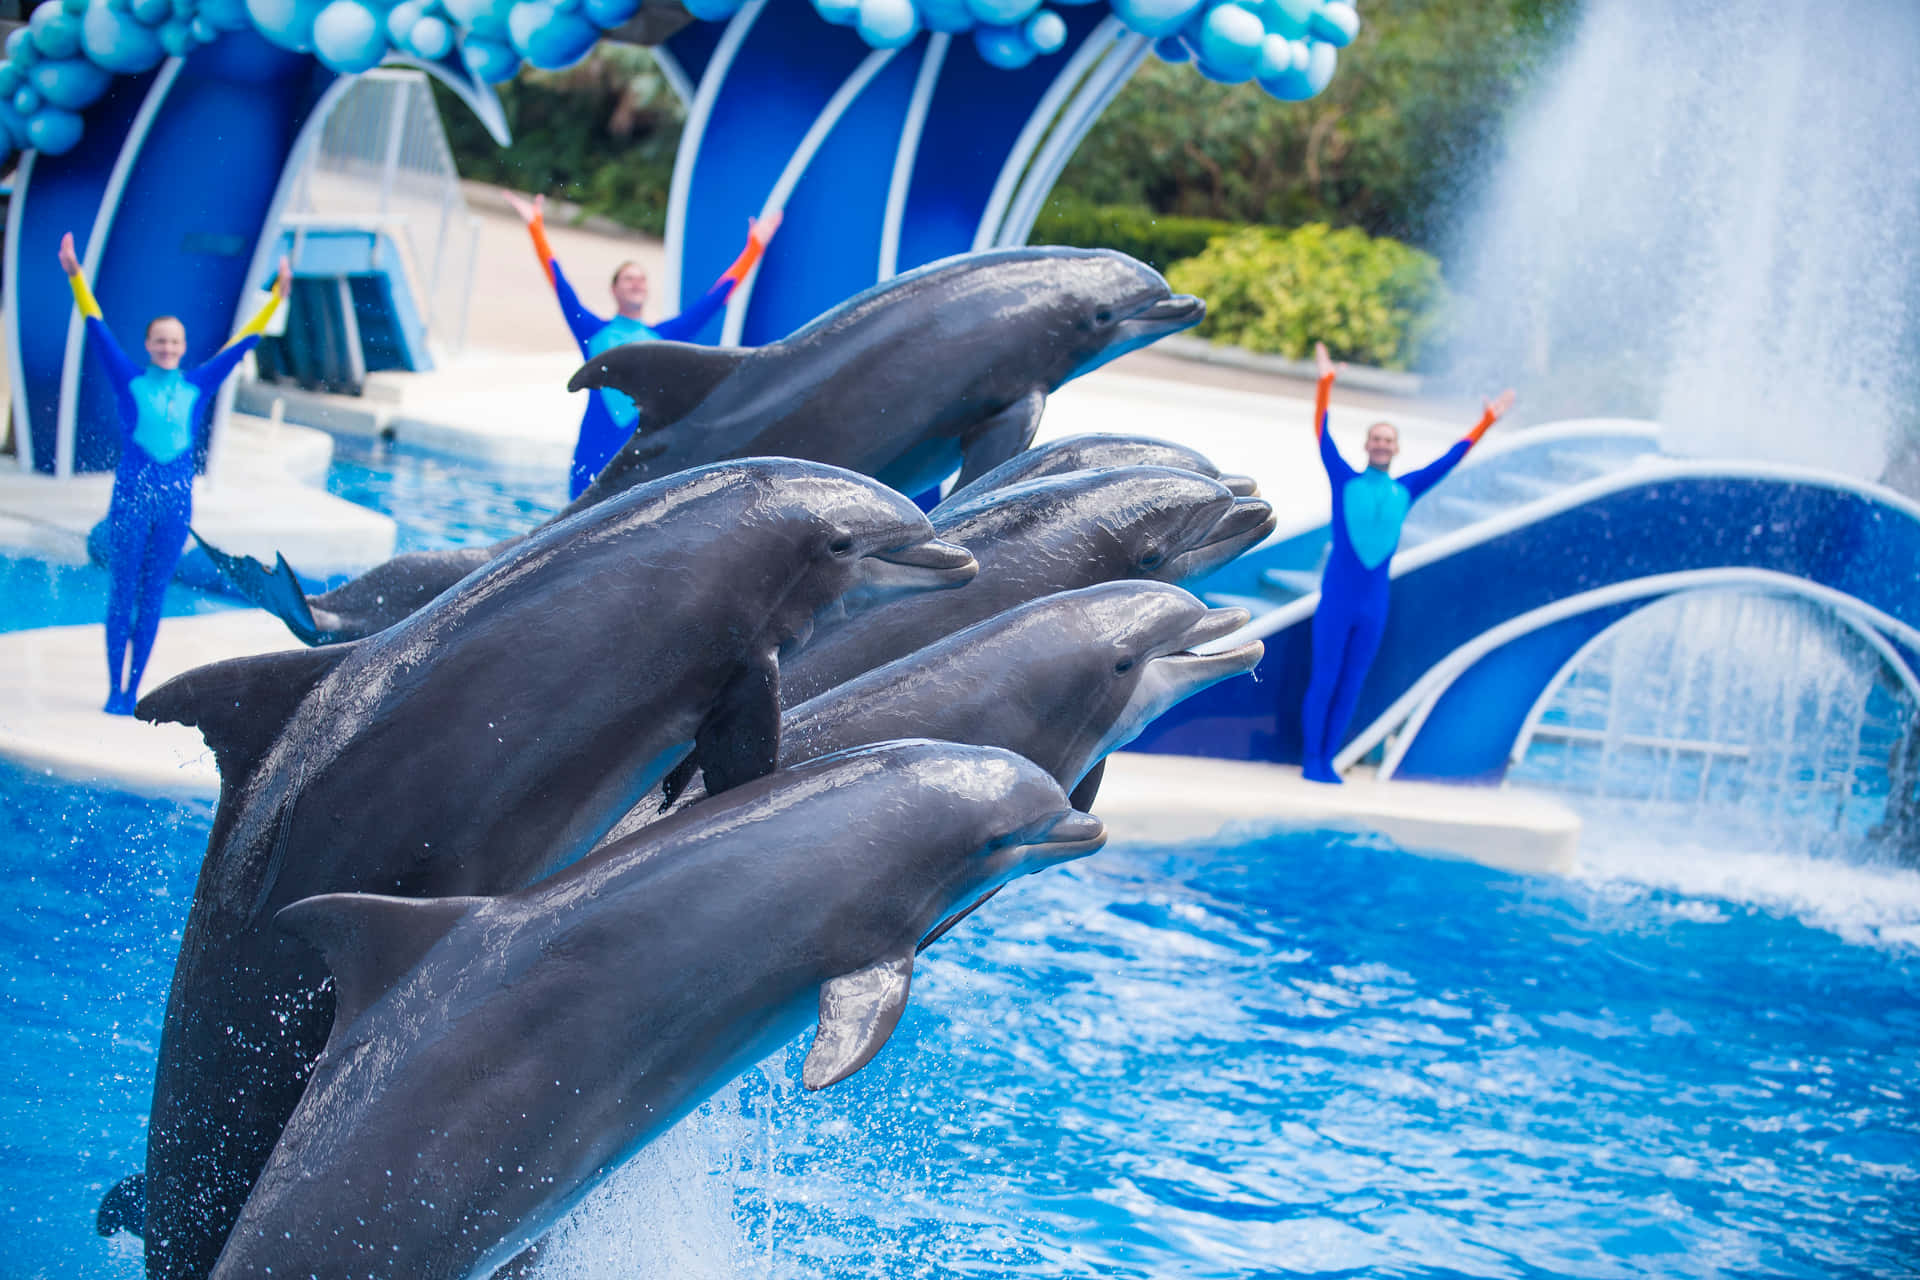 Come explore magical underwater worlds of wonder and adventure at Seaworld.